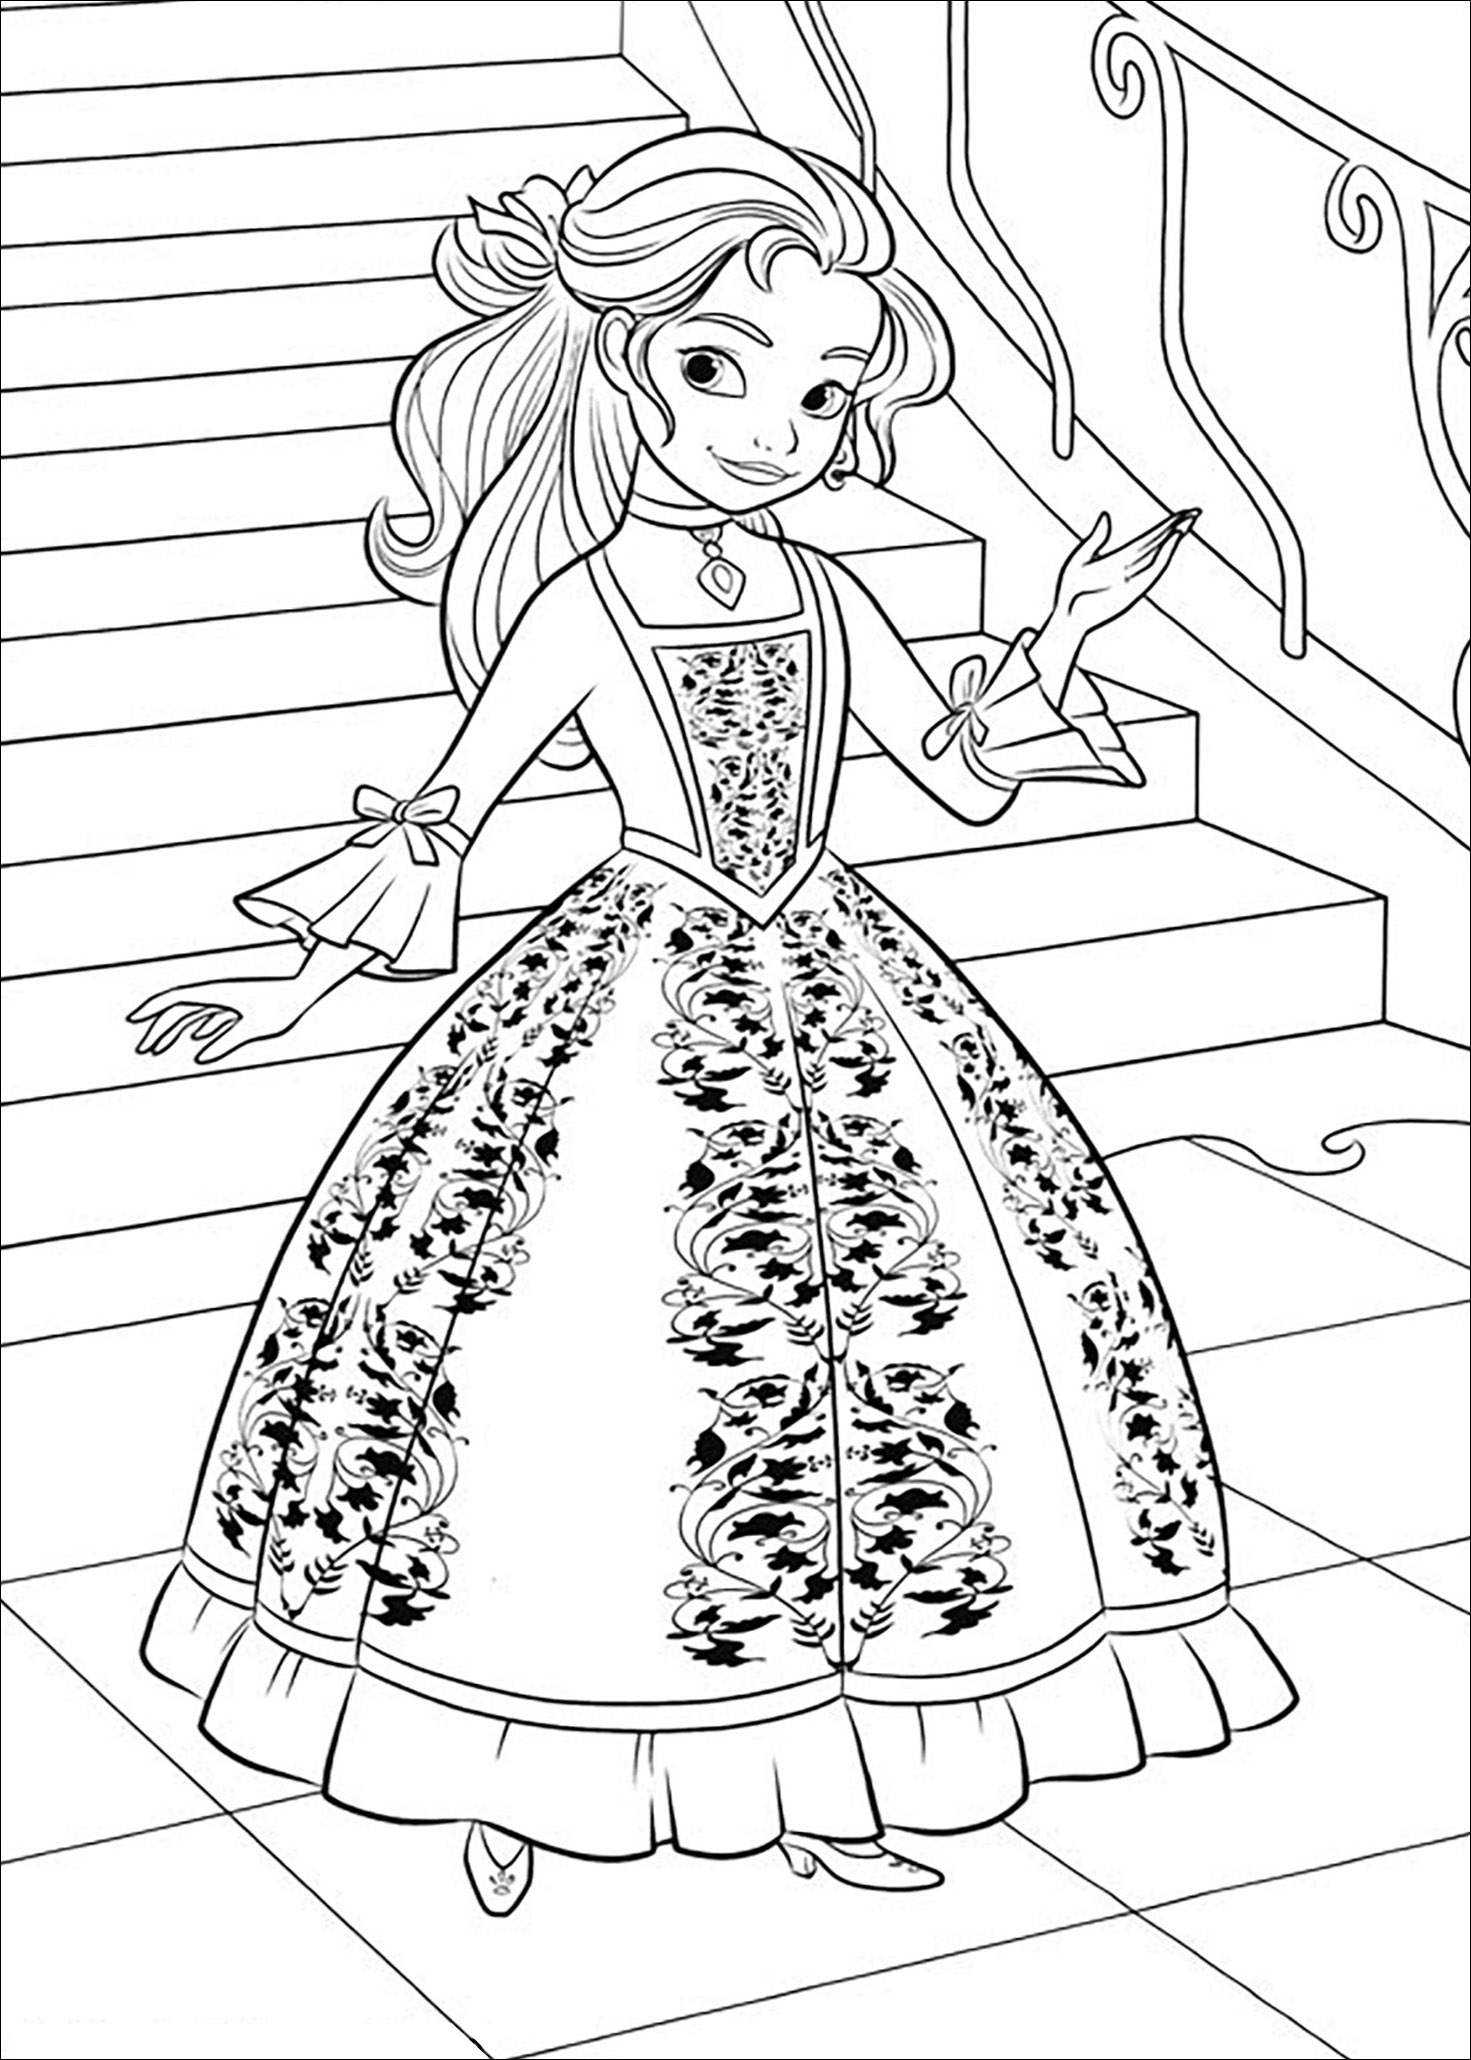 elena-of-avalor-coloring-pages-best-coloring-pages-for-kids